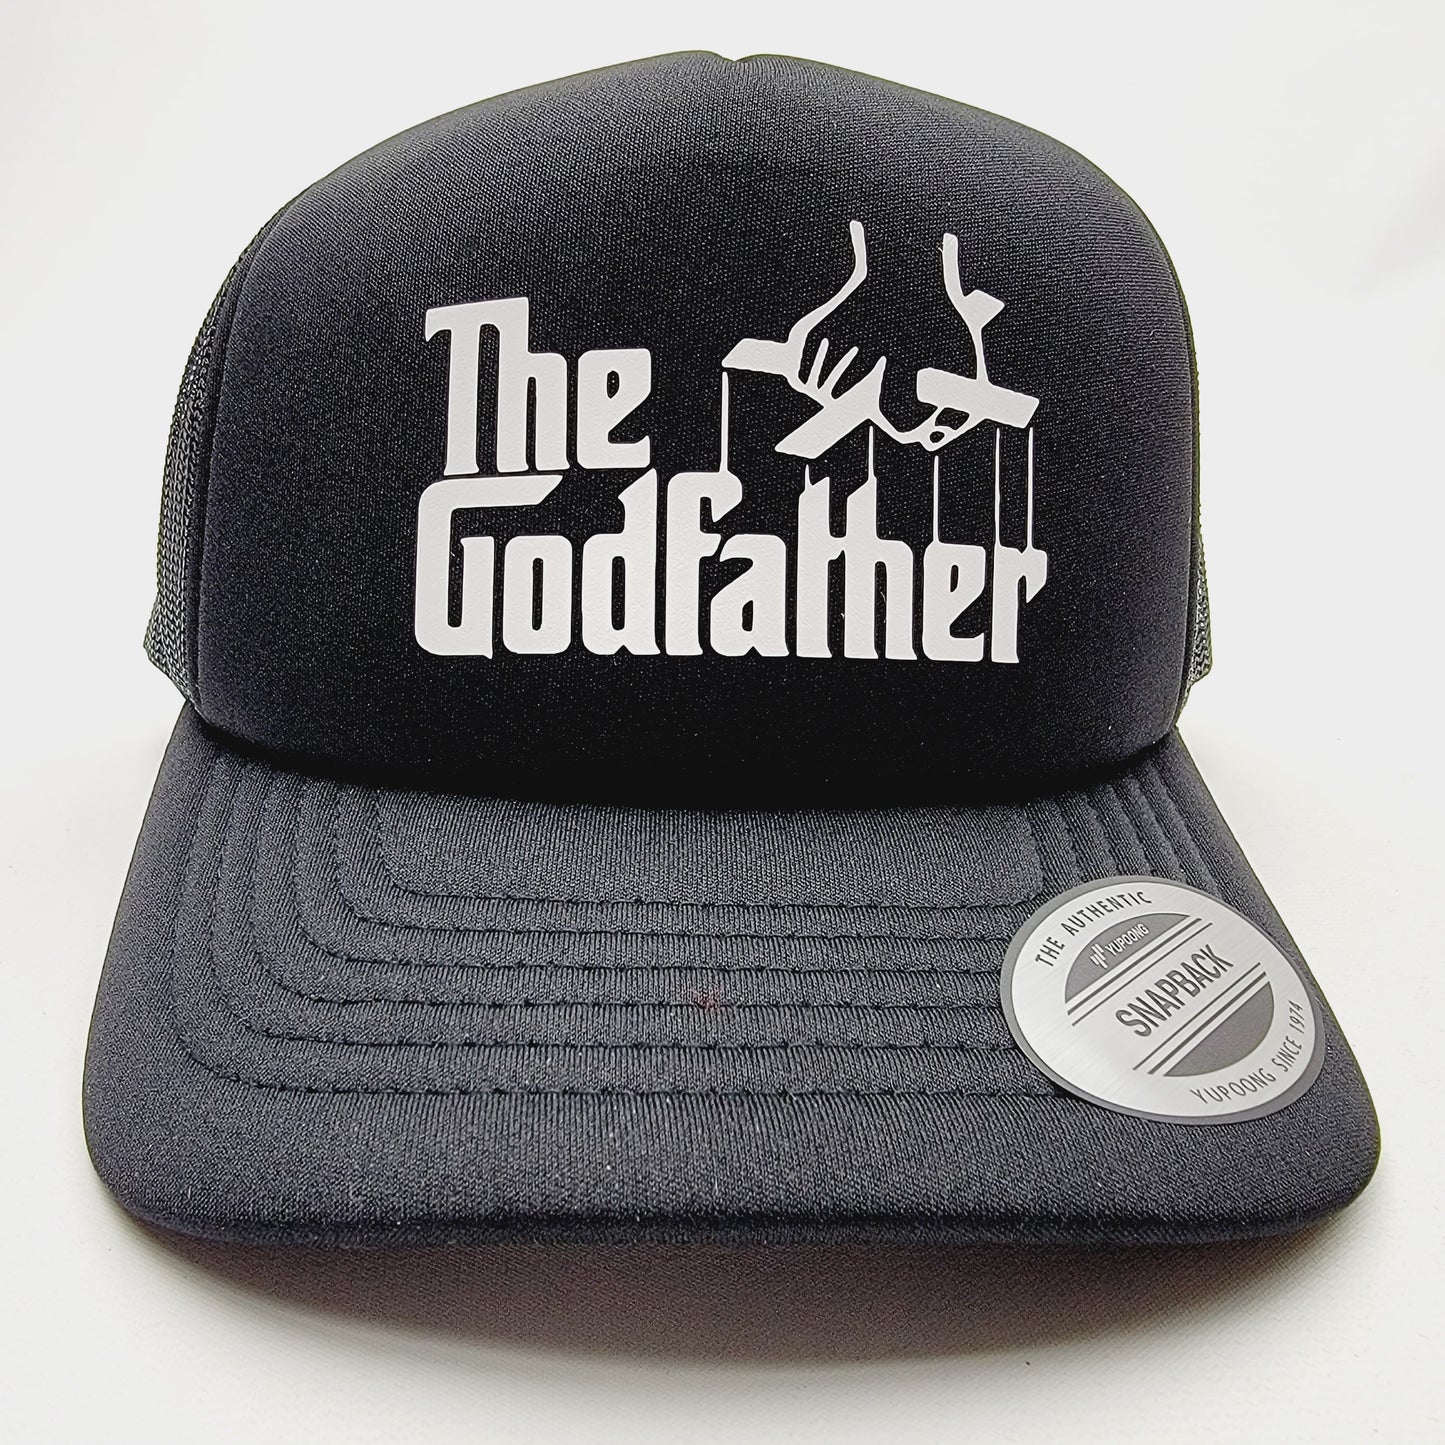 The Godfather Mesh Snapback Trucker Cap Hat Curved Bill HTV application